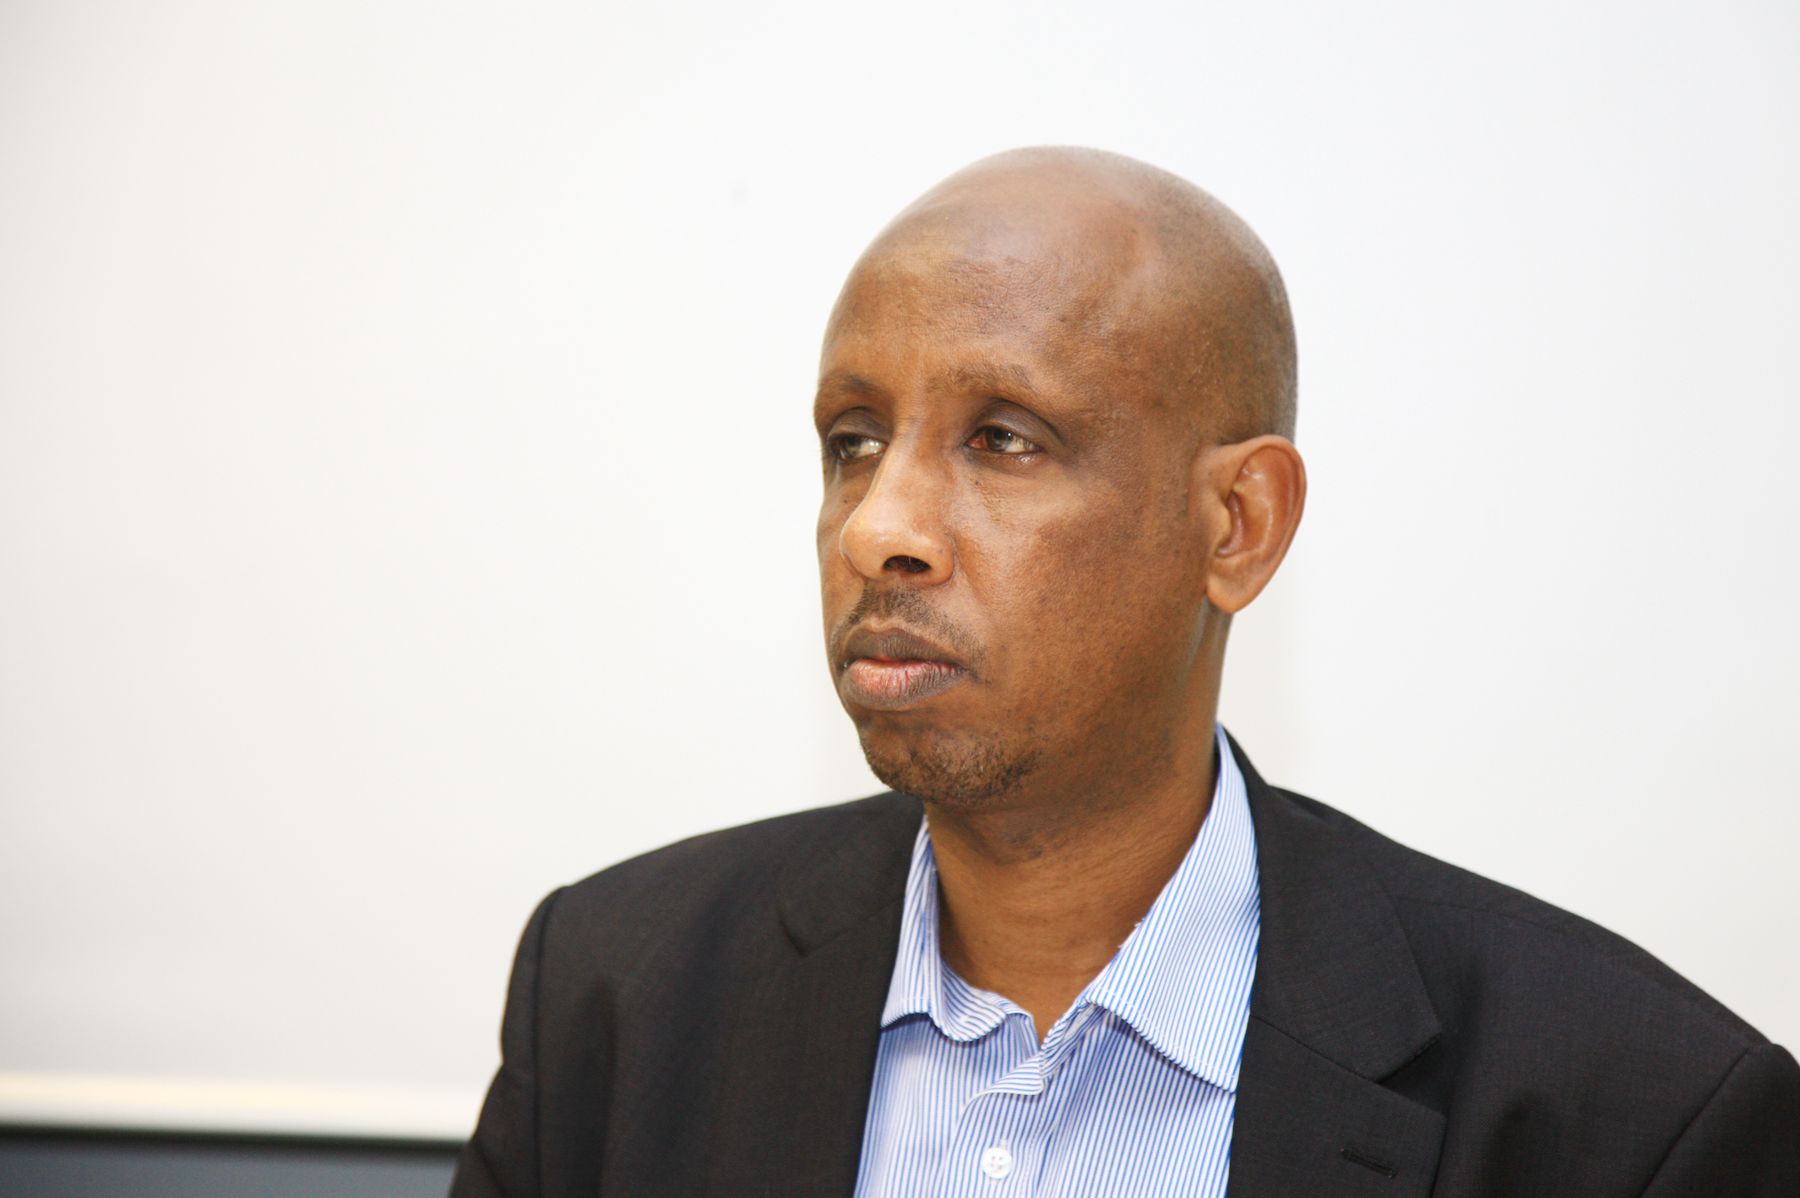 APPEAL FOR COMPUTER DEVICES TO ENABLE HOME LEARNING: Suleiman Abdulahi of the Horn of Africa group.